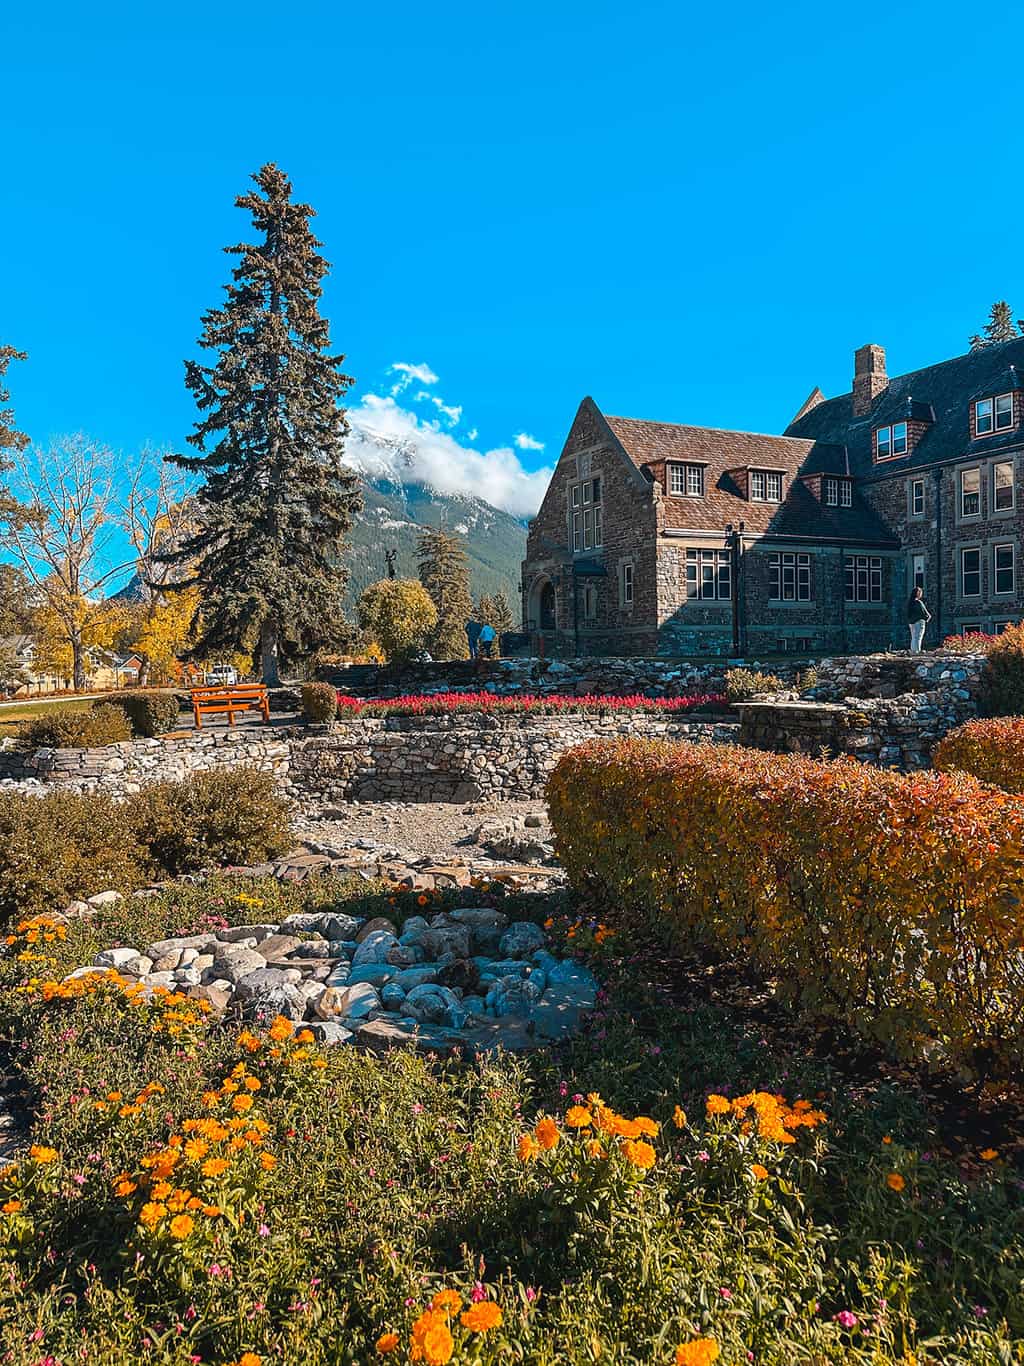 Cascade of Time Garden in the town of Banff in Banff National Park Alberta Canada